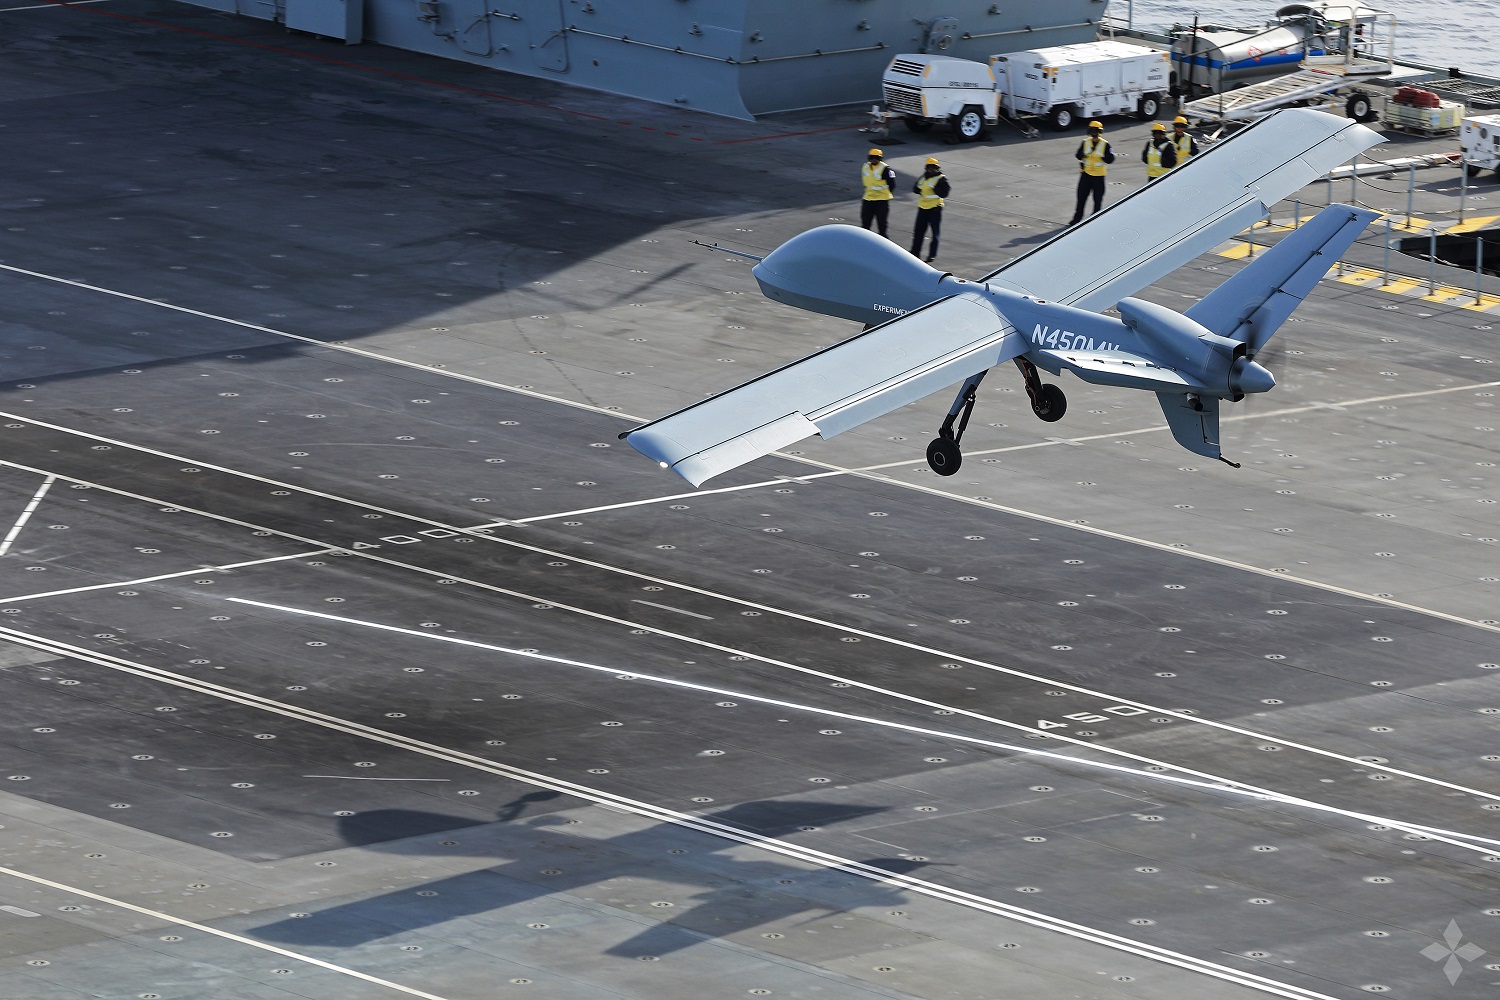 MQ-9B STOL will be capable of carrying the same payloads and conducting the same missions as the SkyGuardian and SeaGuardian, including maritime surveillance, anti-submarine warfare, airborne early warning, and surface strike.